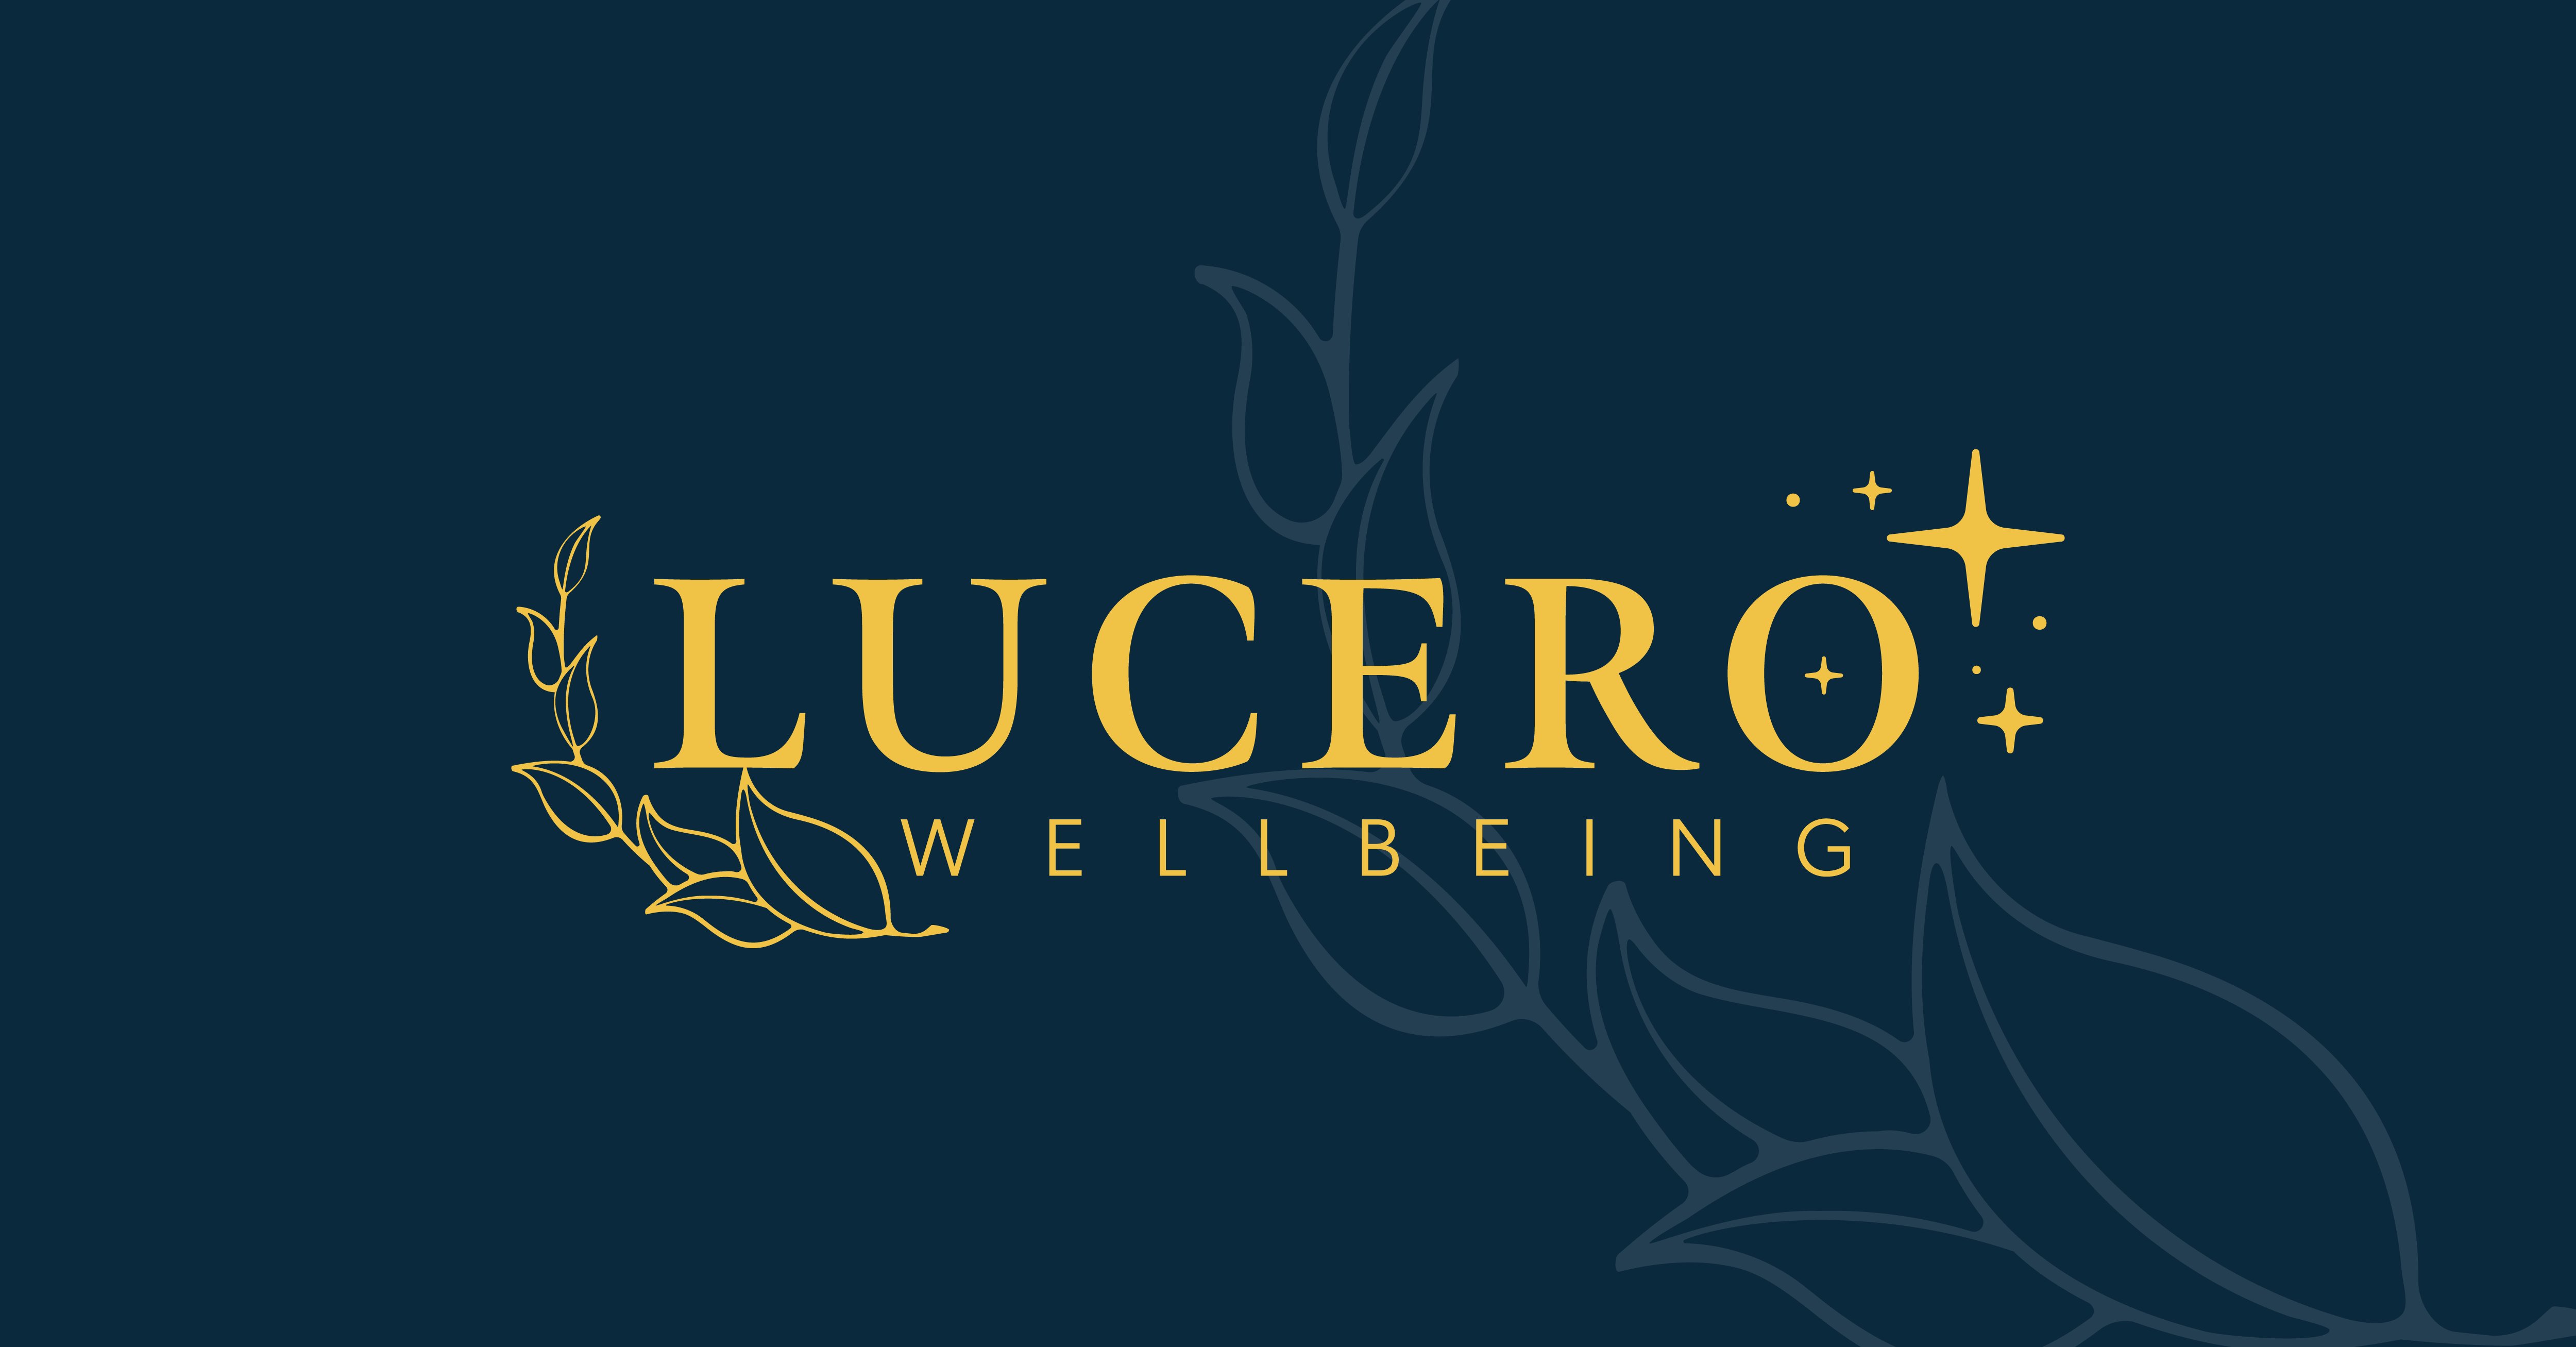 Logo of "Lucero Wellbeing" featuring stylized text with decorative leaf motifs and star-like accents on a dark blue background.